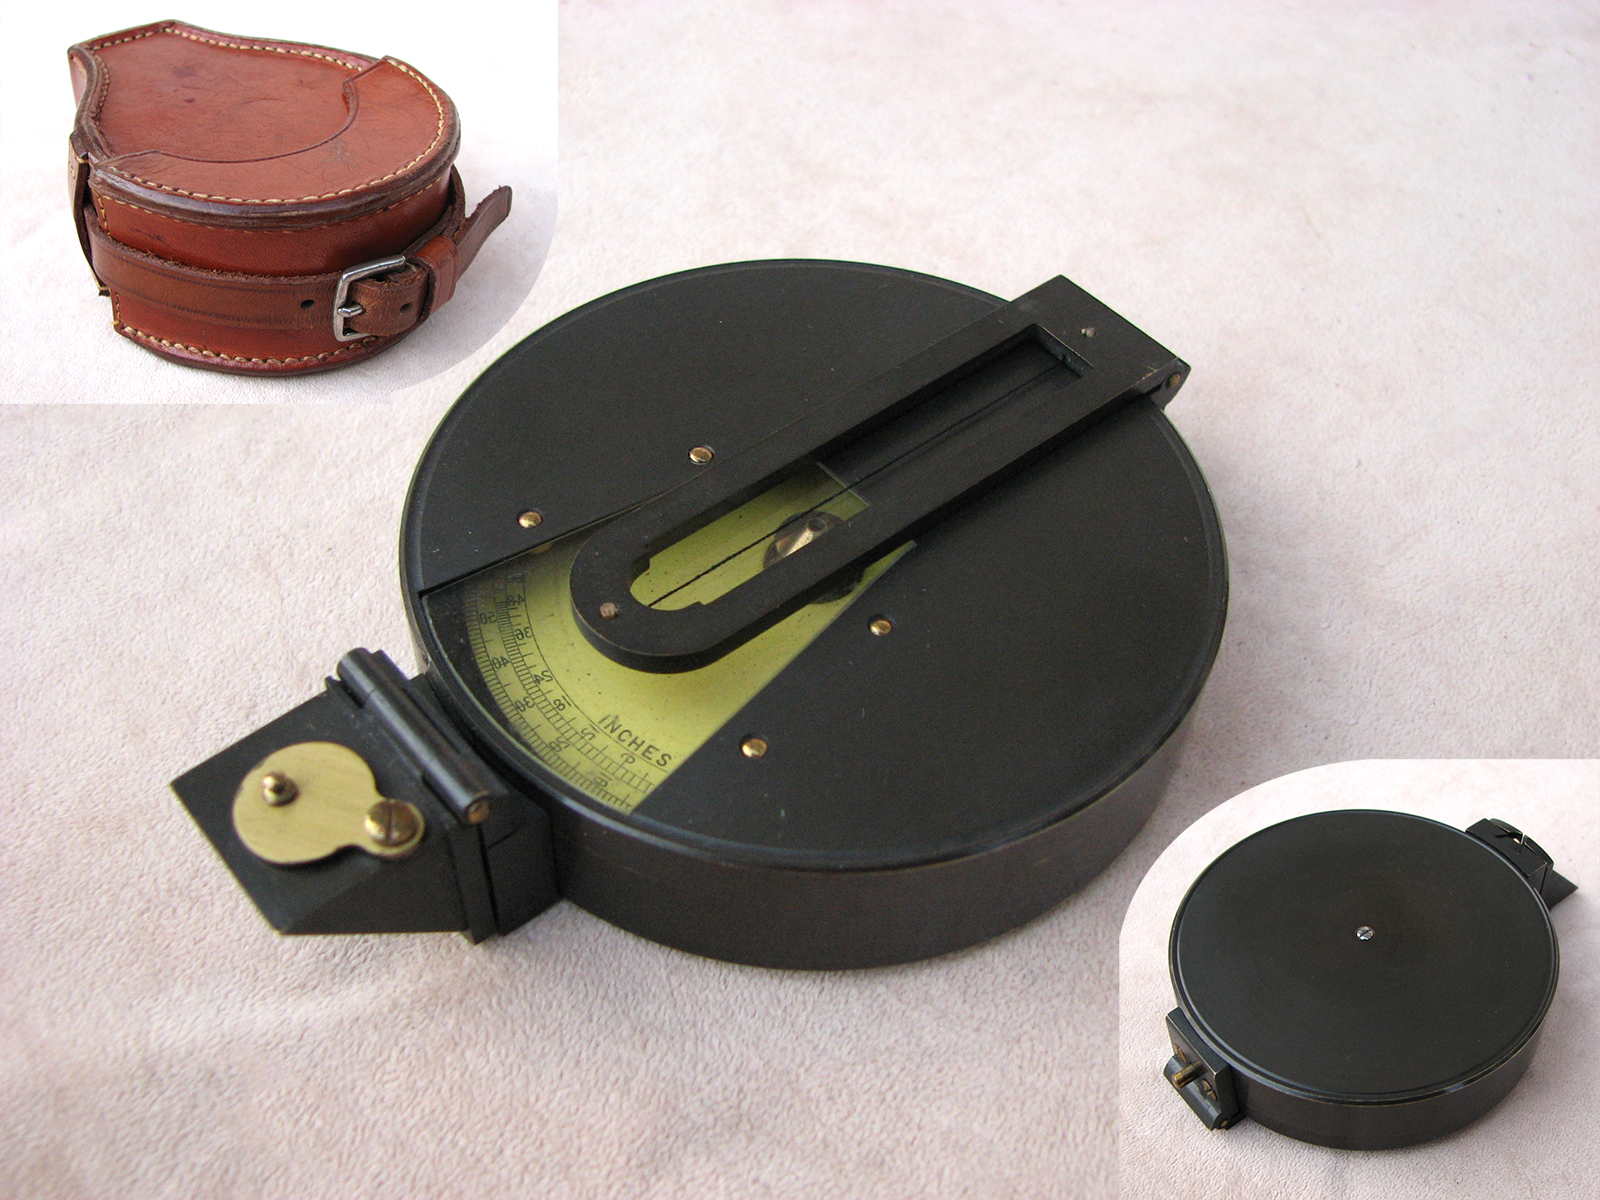 Prismatic inches per yard clinometer in fitted leather case